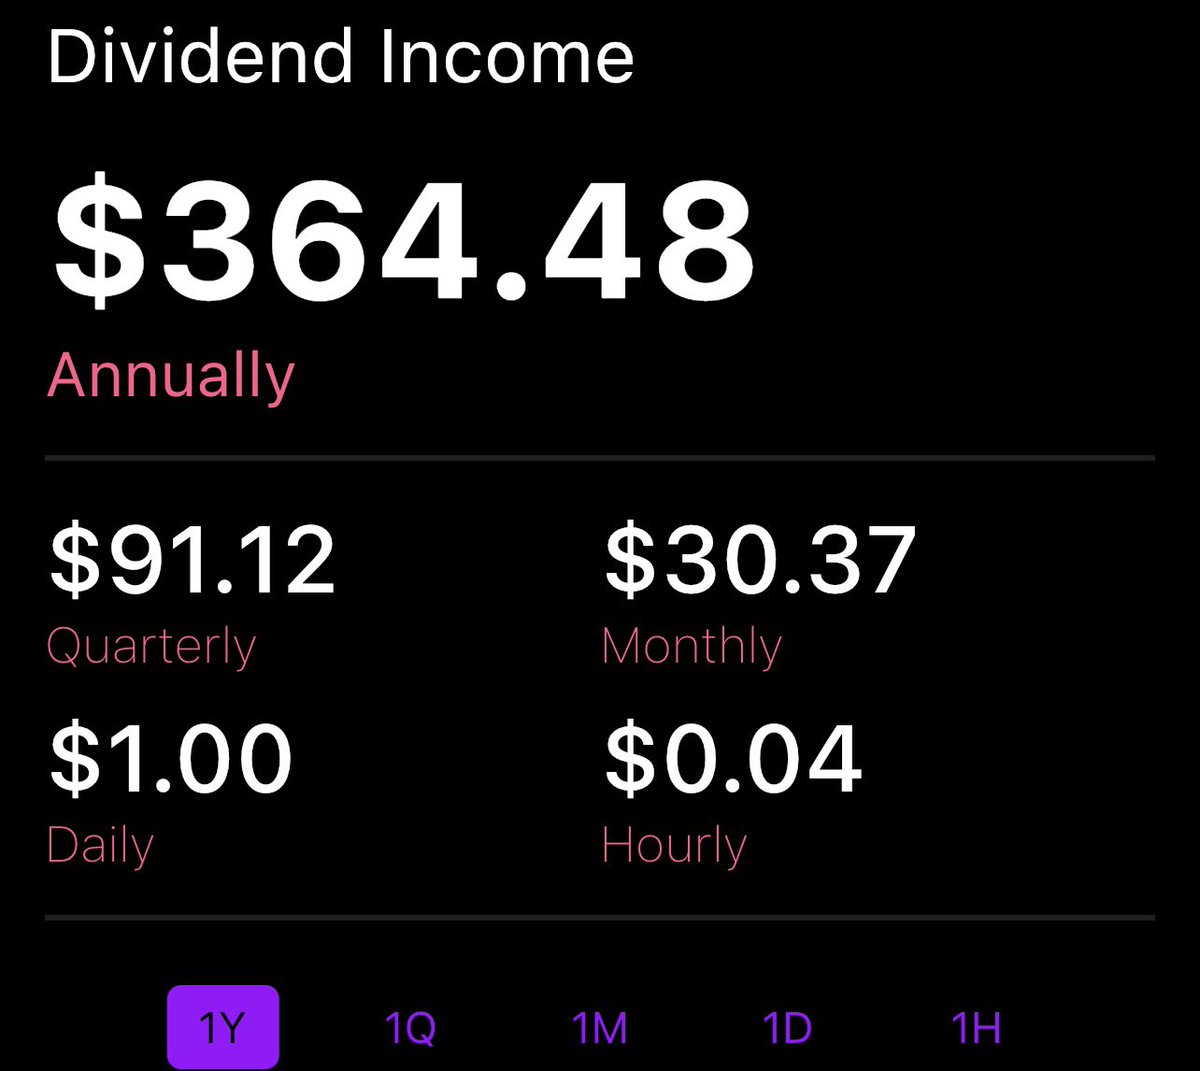 Finally made it to $1 per day. Now the calculations begin…🤔 If I live in my car and only rent a hotel room to shower once a week I could live off of $10 per day probably. Freedom here I come!!! lol

#purplebrick #dividendinvesting #divtwit #stonks #dividends $SCHD $VOO $O $TFC